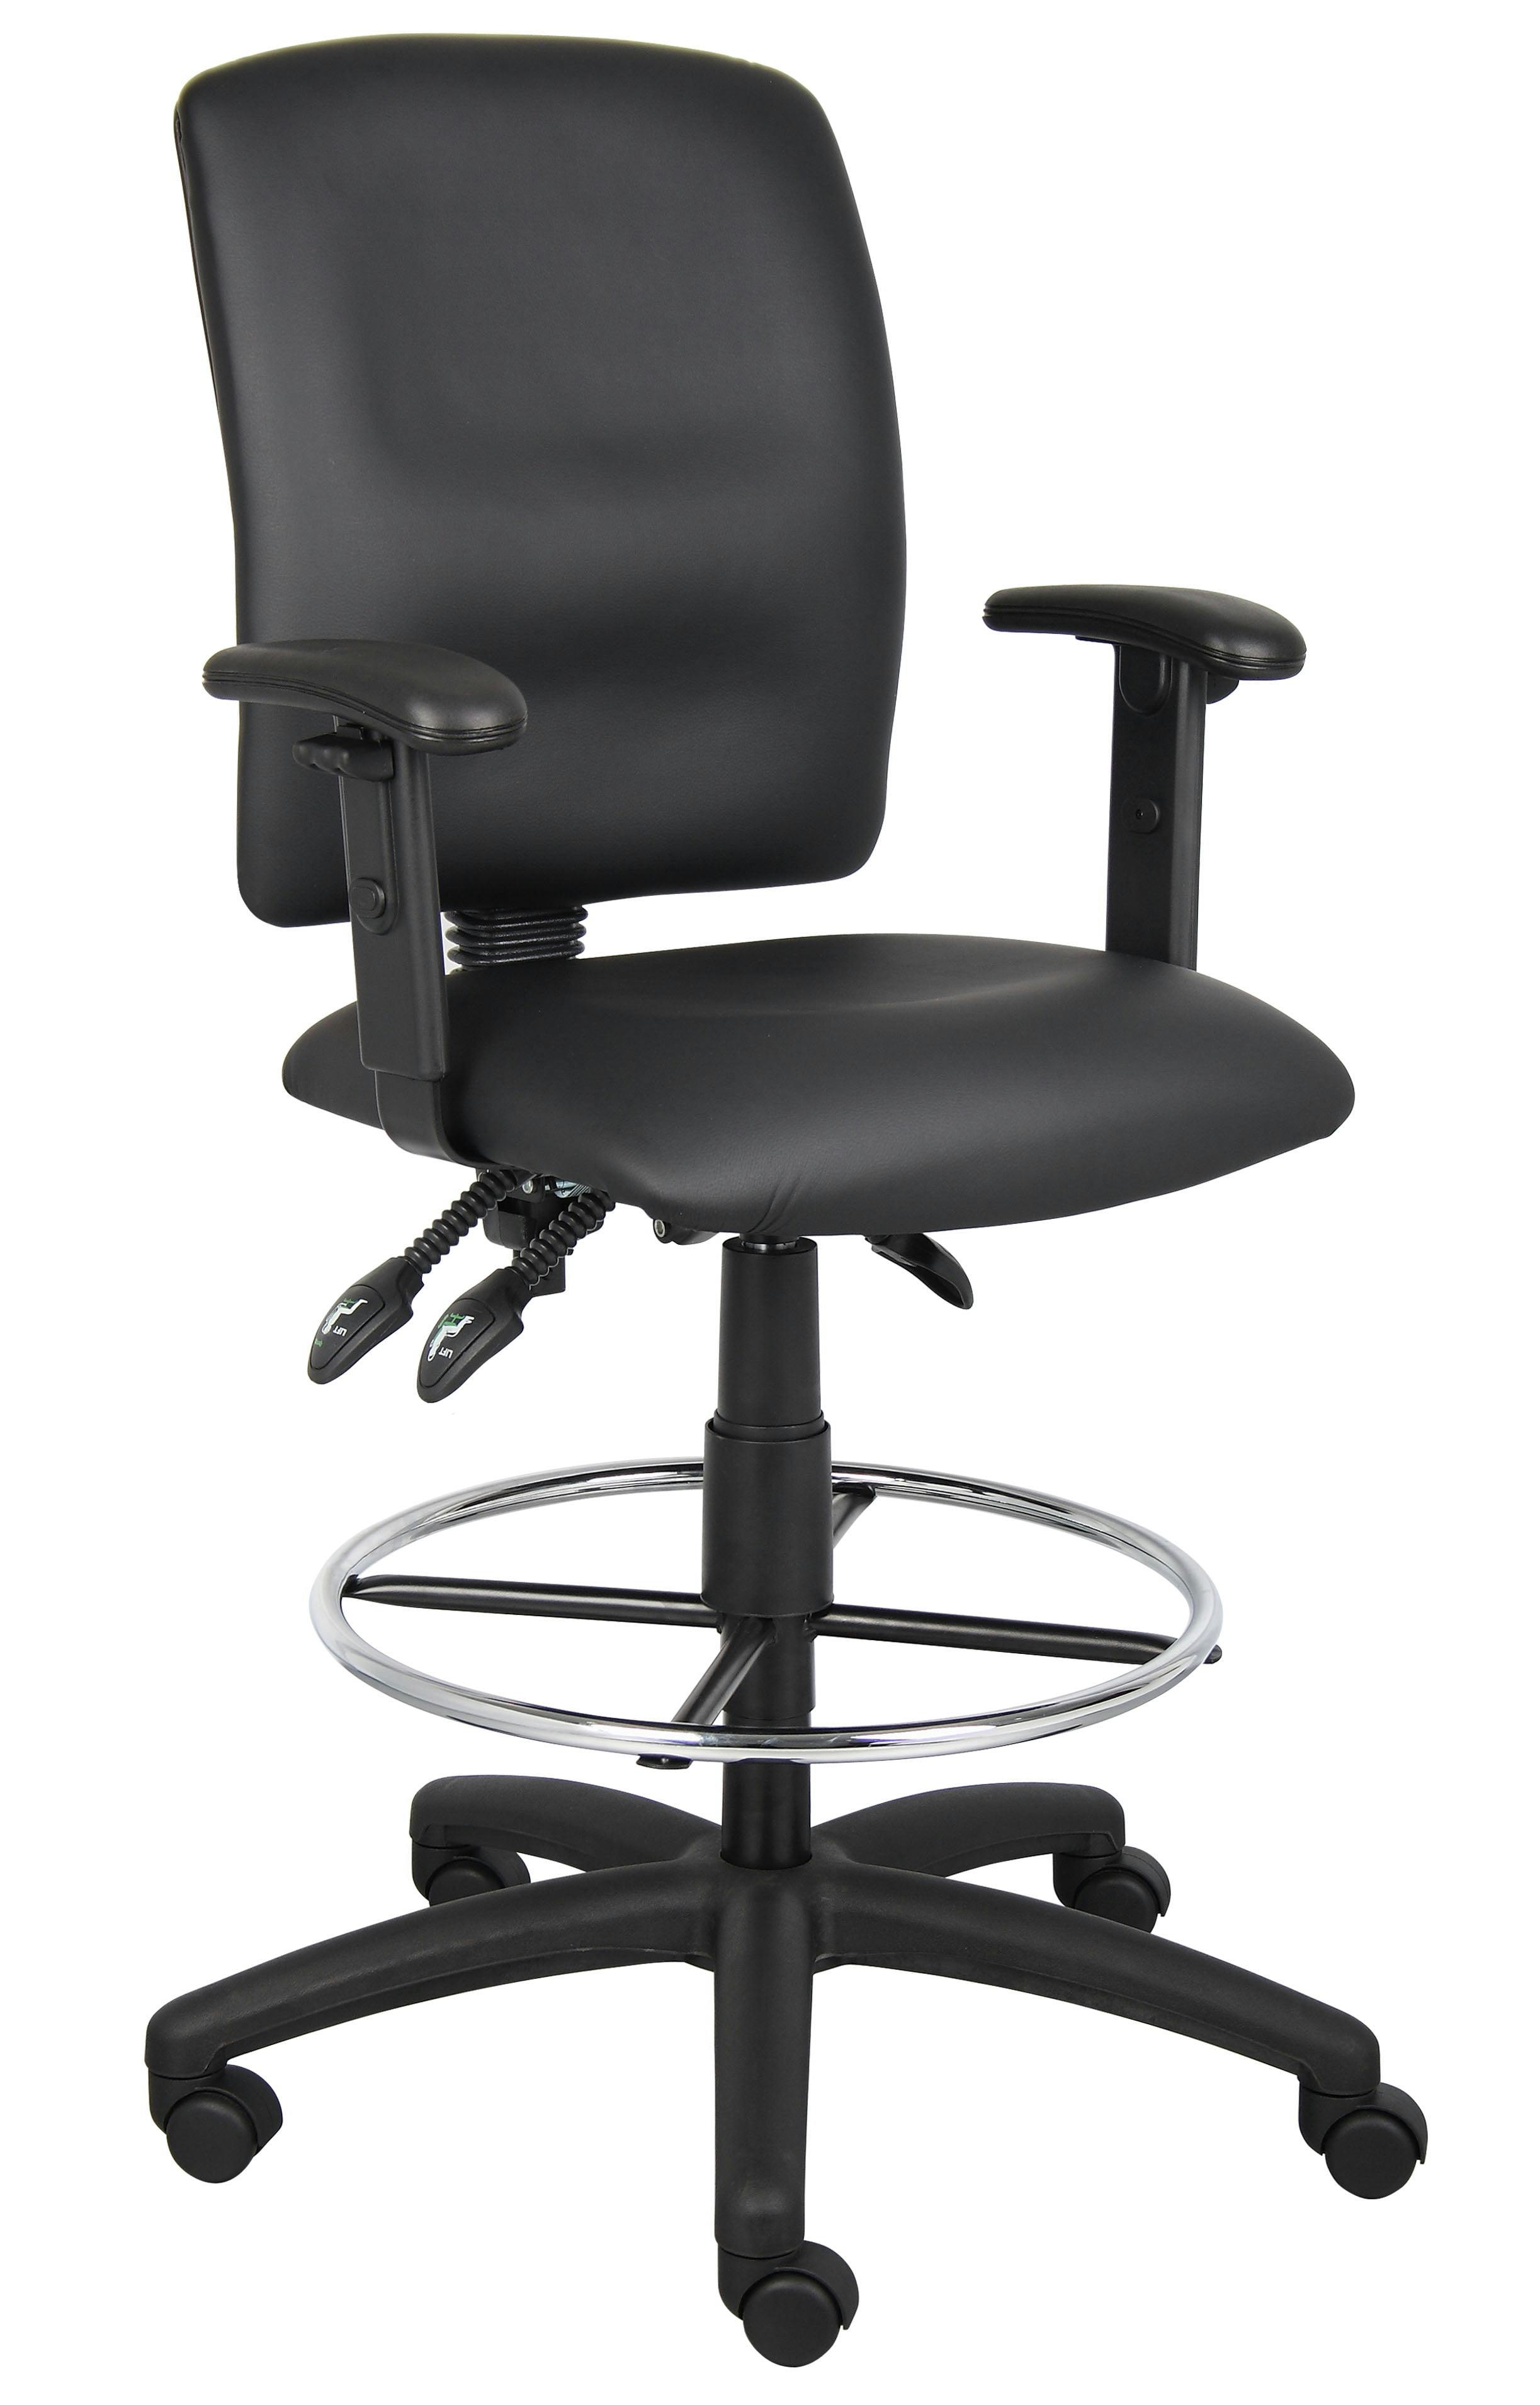 Adjustable Black LeatherPlus Drafting Chair with Swivel & Chrome Footring